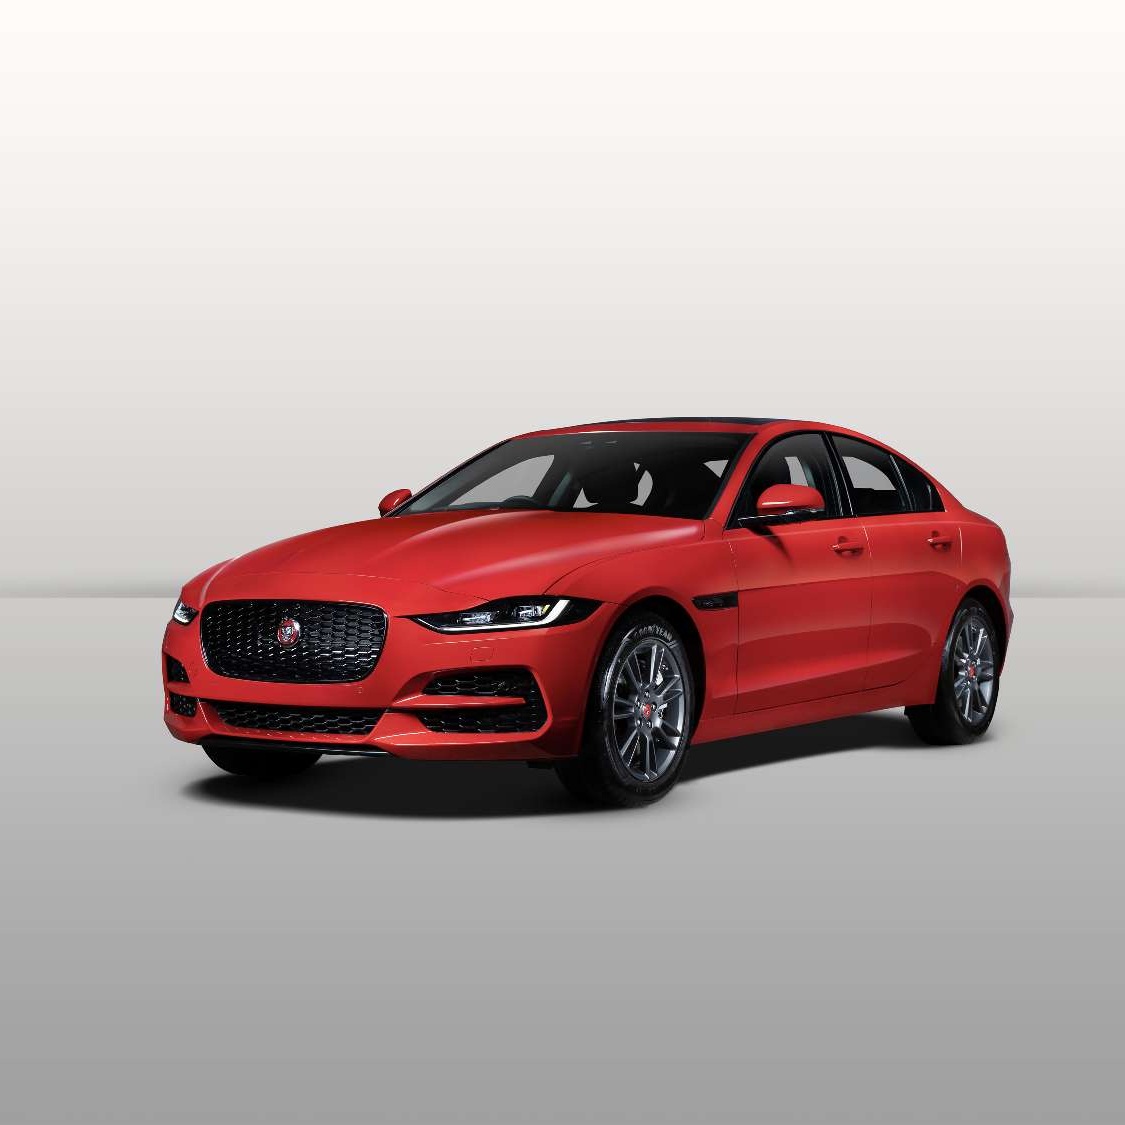 Jaguar Xe Facelift Launched In India From Rs 44 98 Lakh